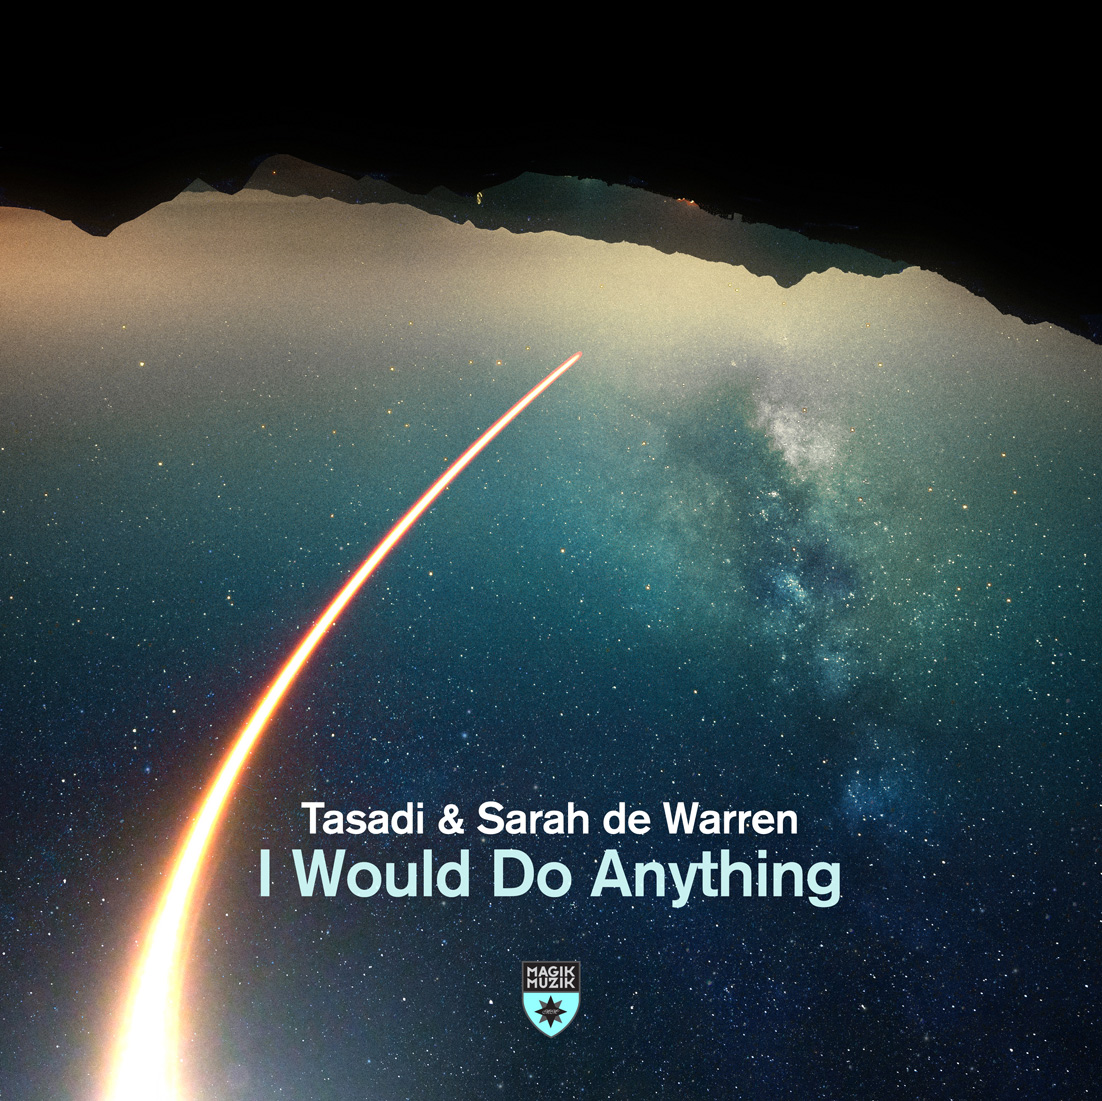 Tasadi and Sarah de Warren presents I Would Do Anything on Black Hole Recordings